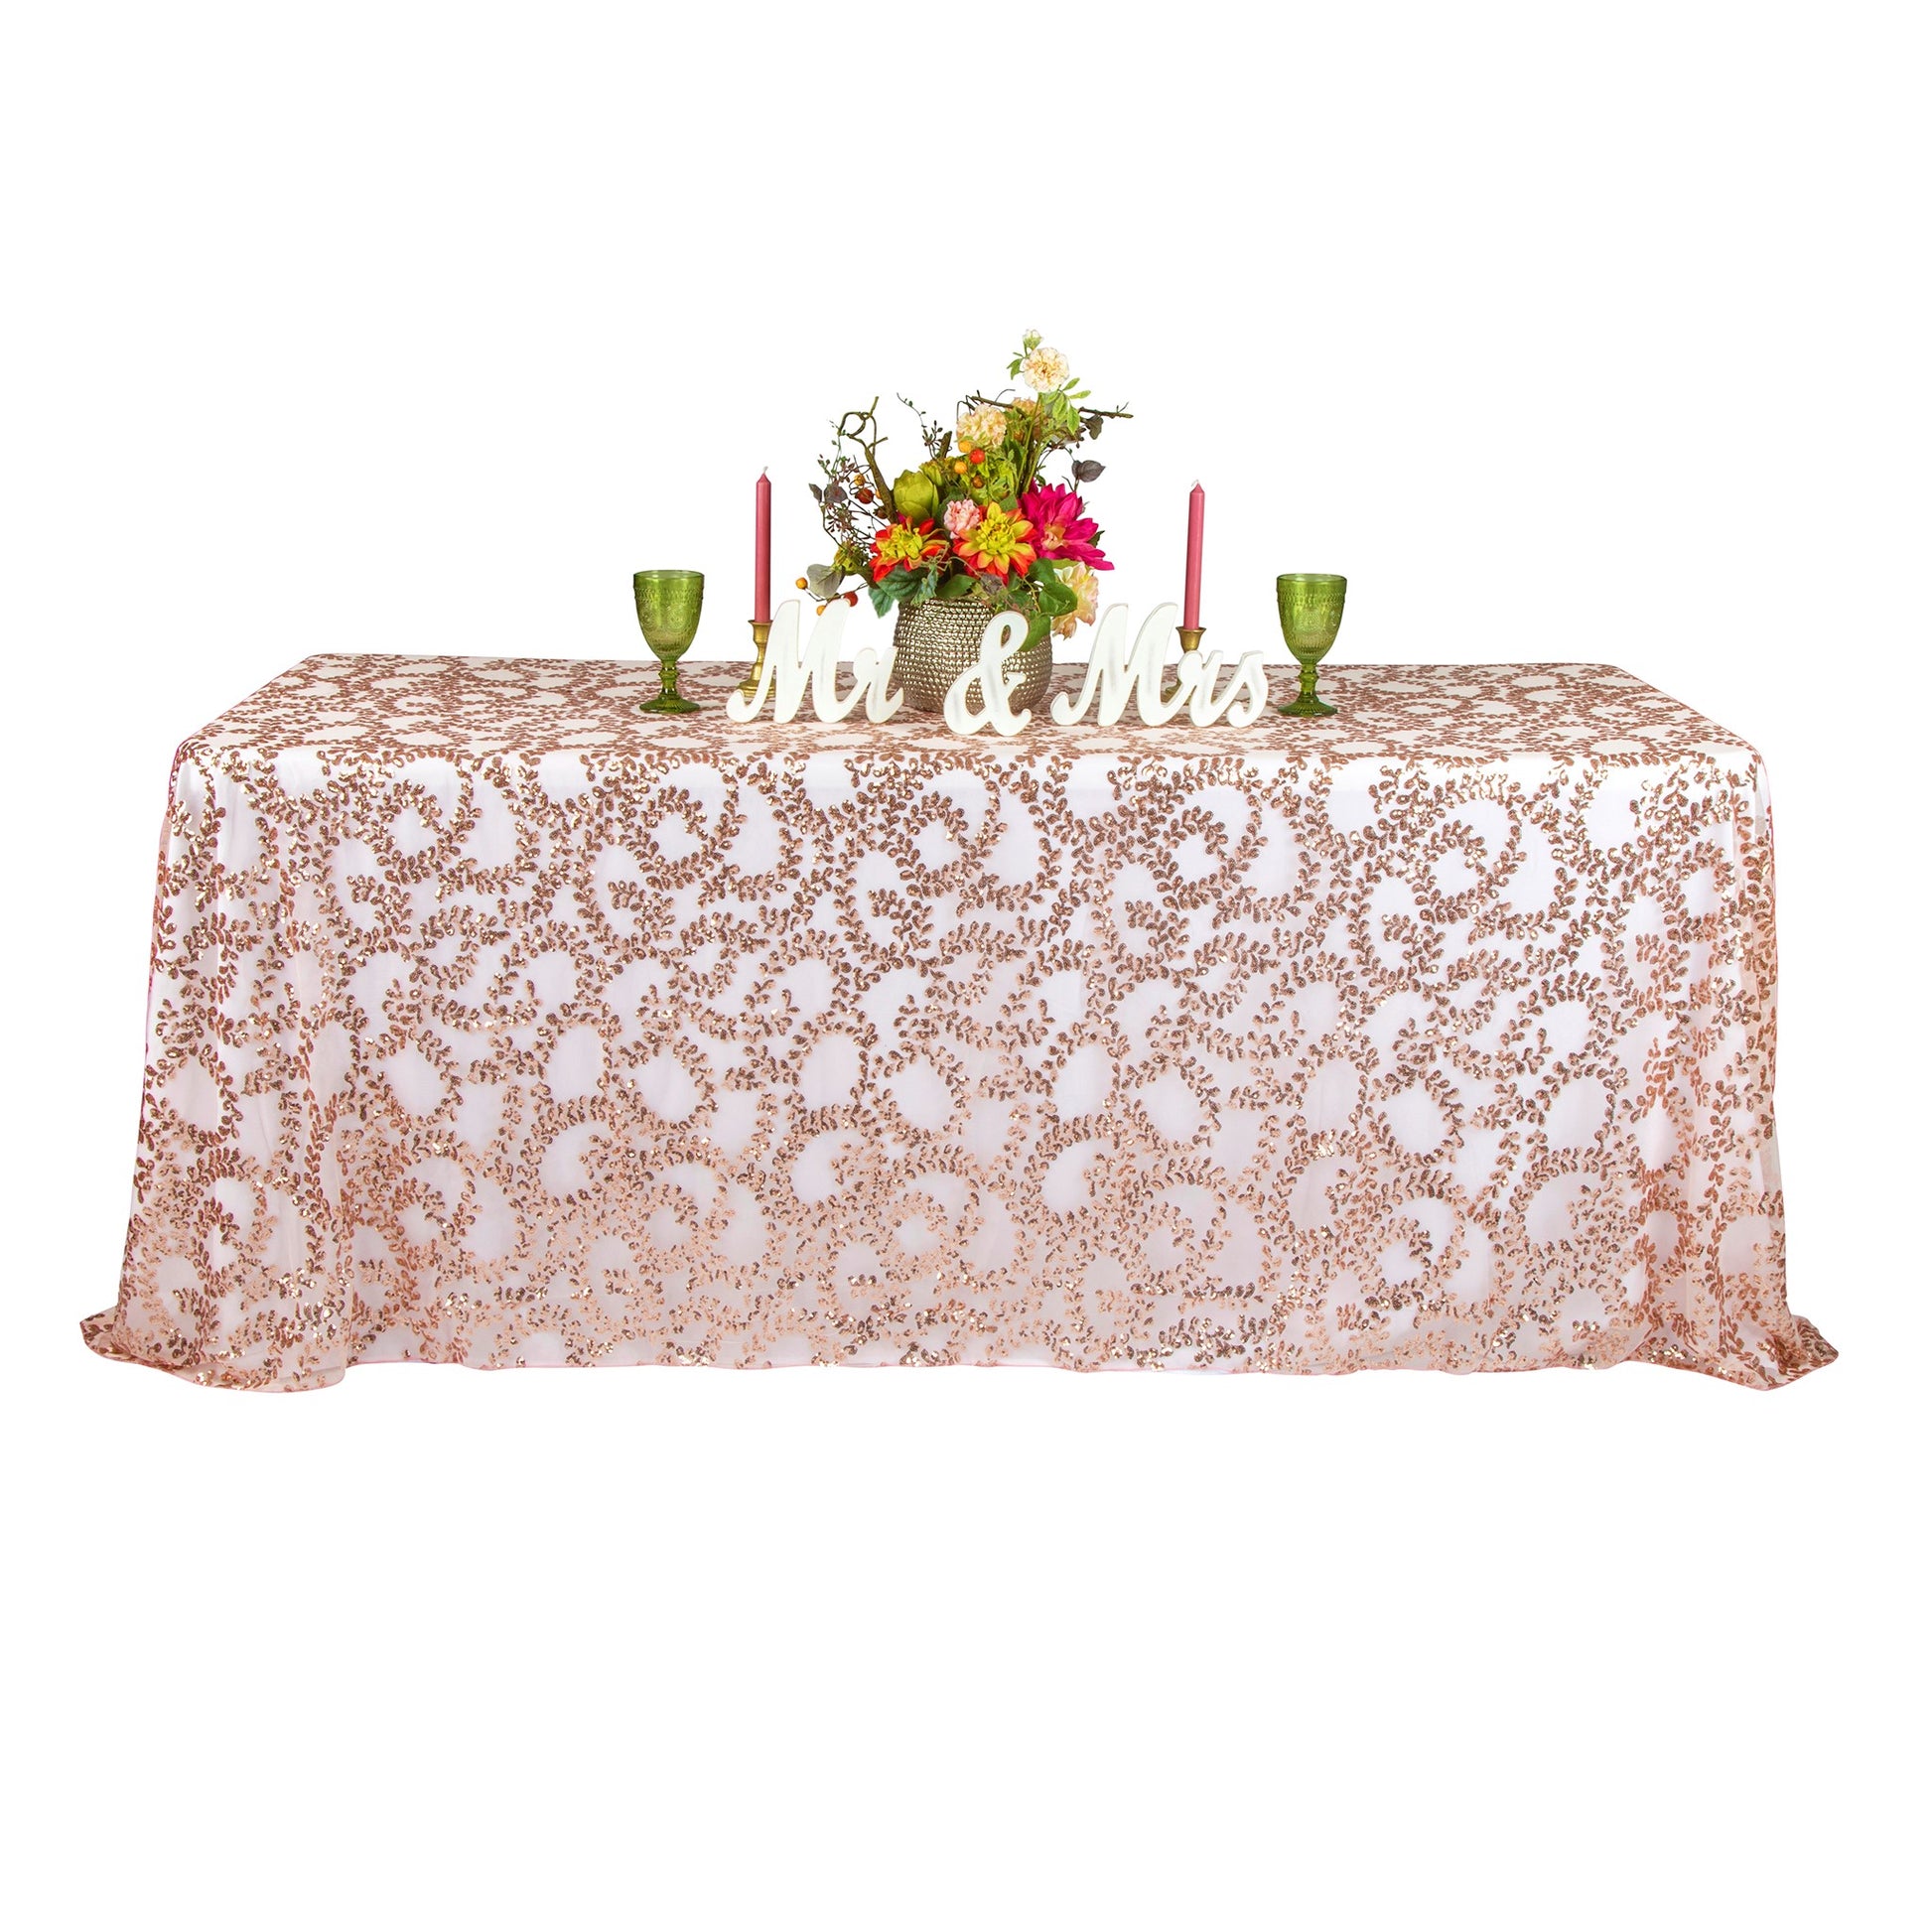 Sequin Vine Tablecloth Overlay 90"x132" Rectangle - Blush/Rose Gold